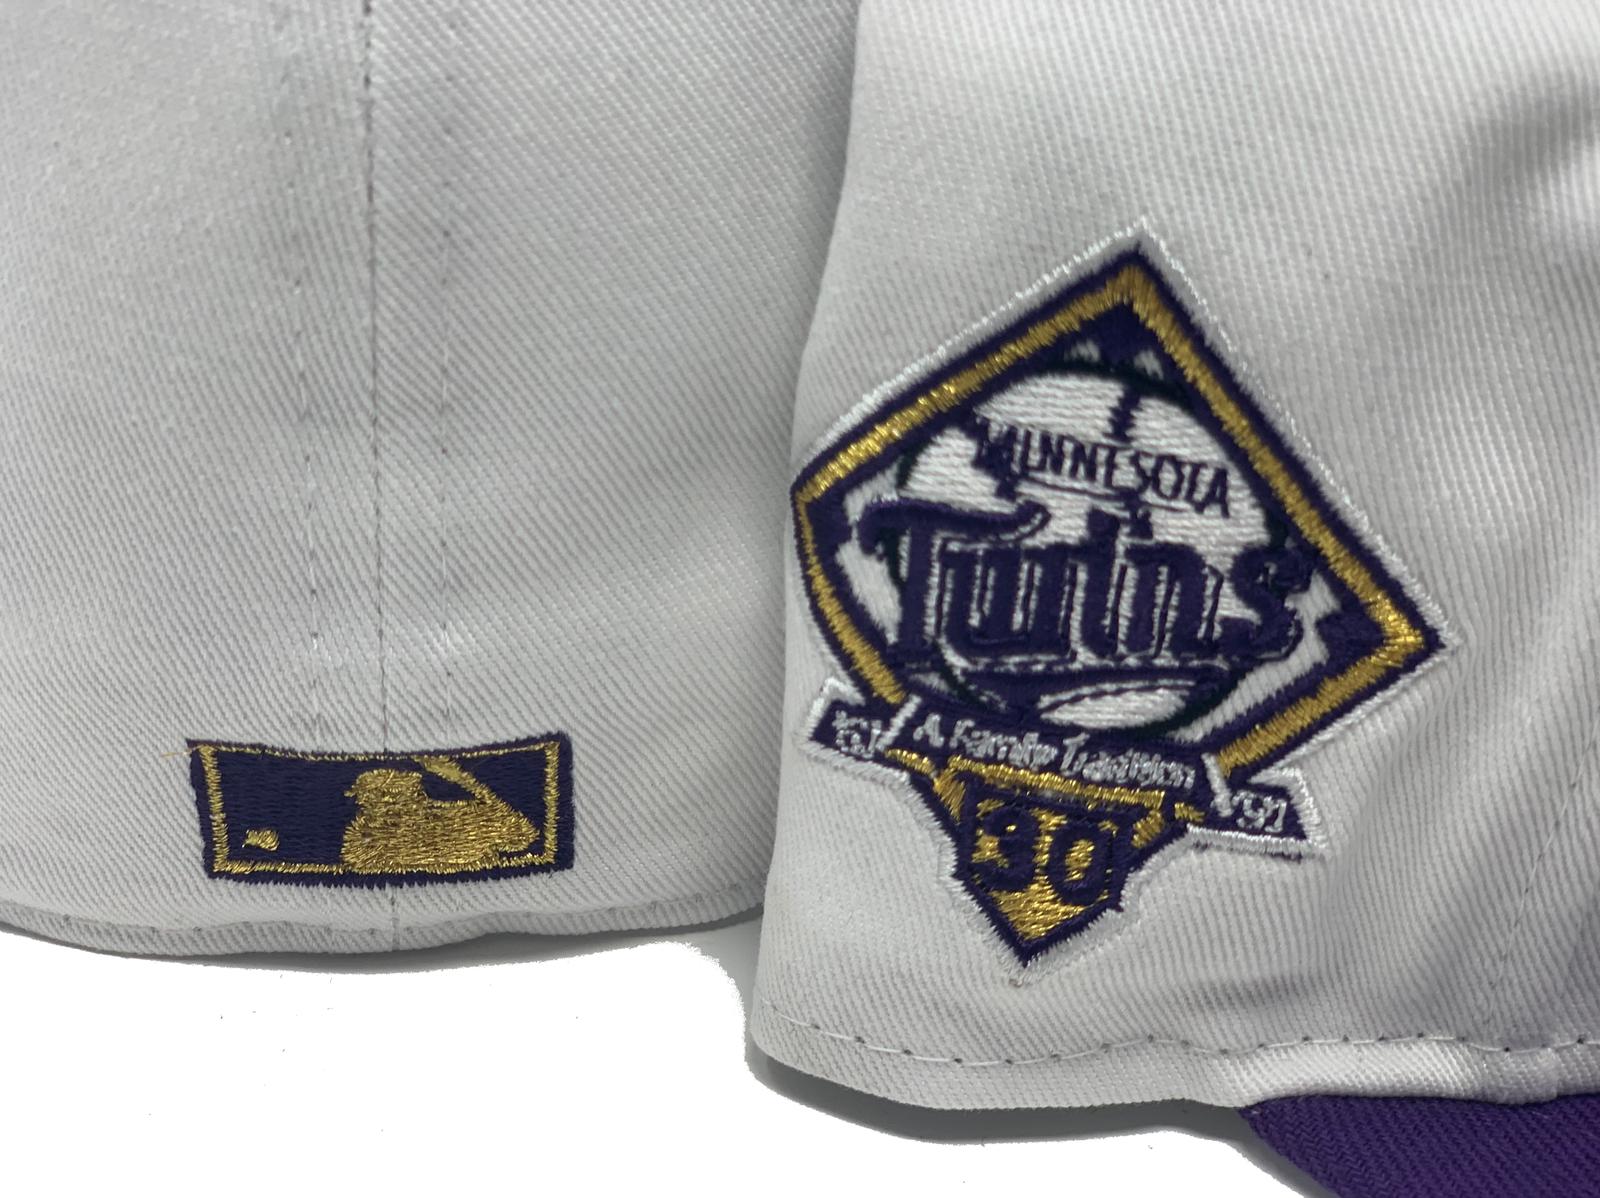 Twins Will Give Away Purple Jerseys, Caps For 3rd Annual 'Prince